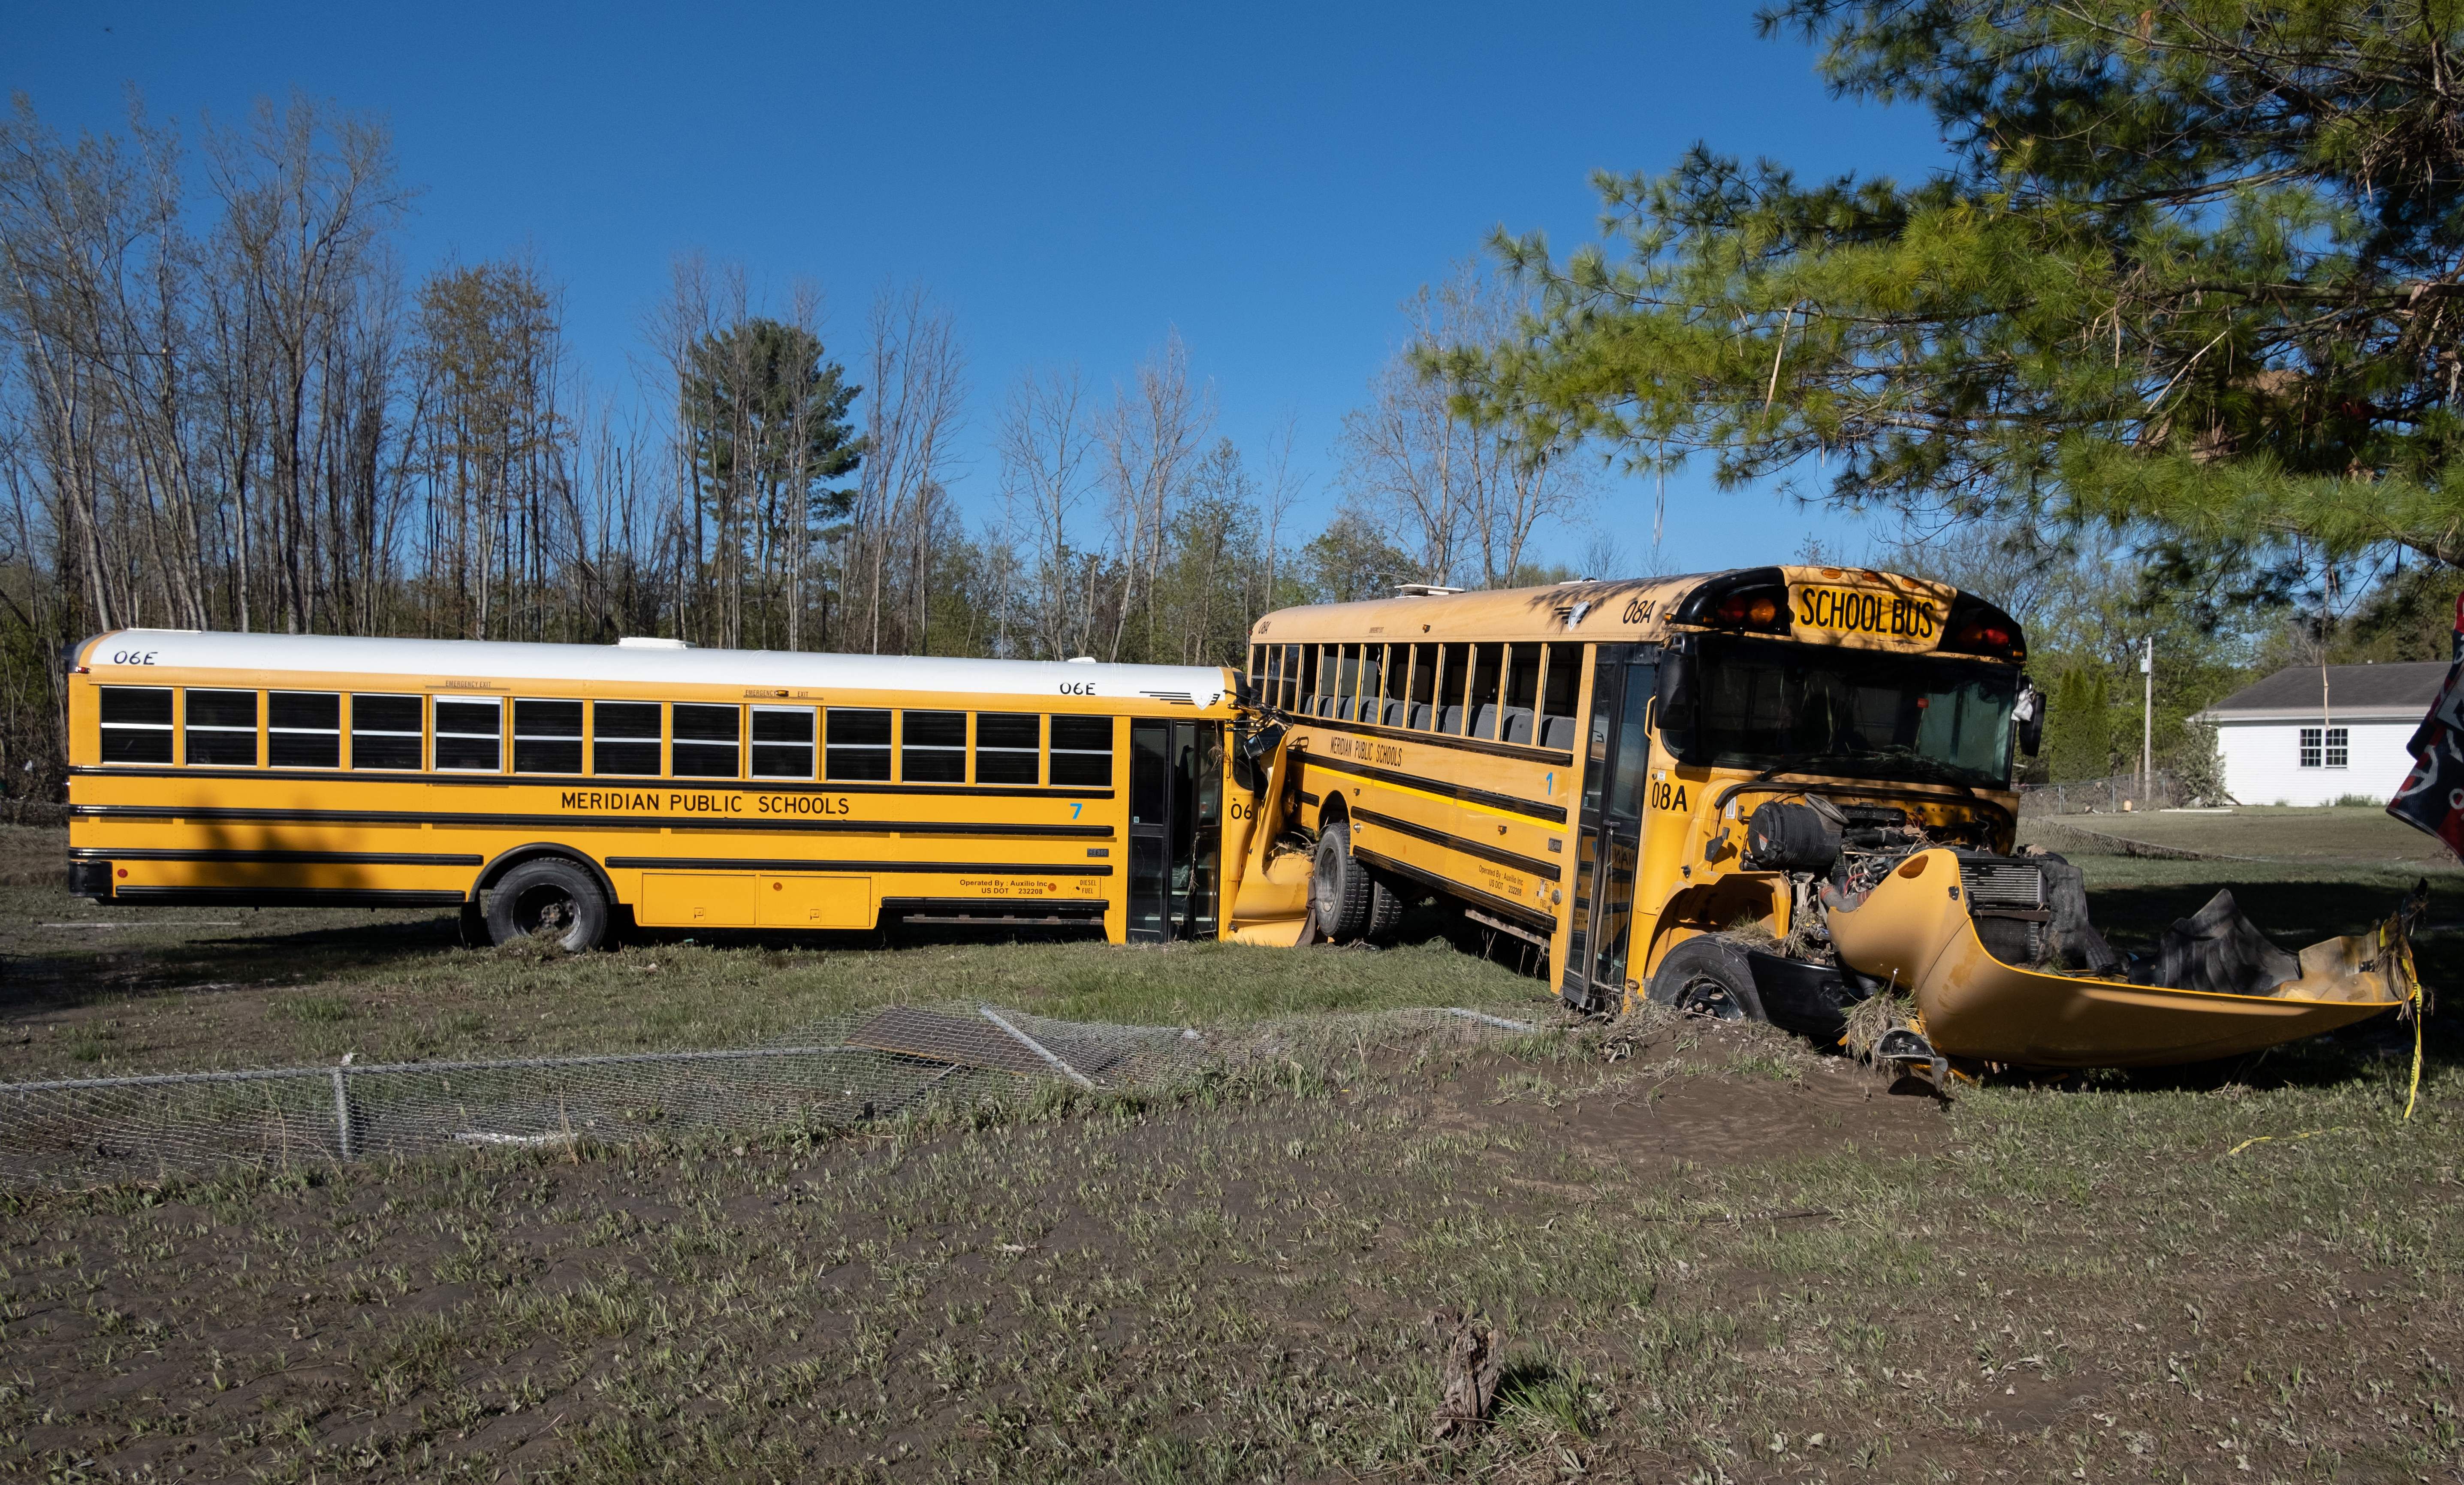 In this image, two school buses are in a field 